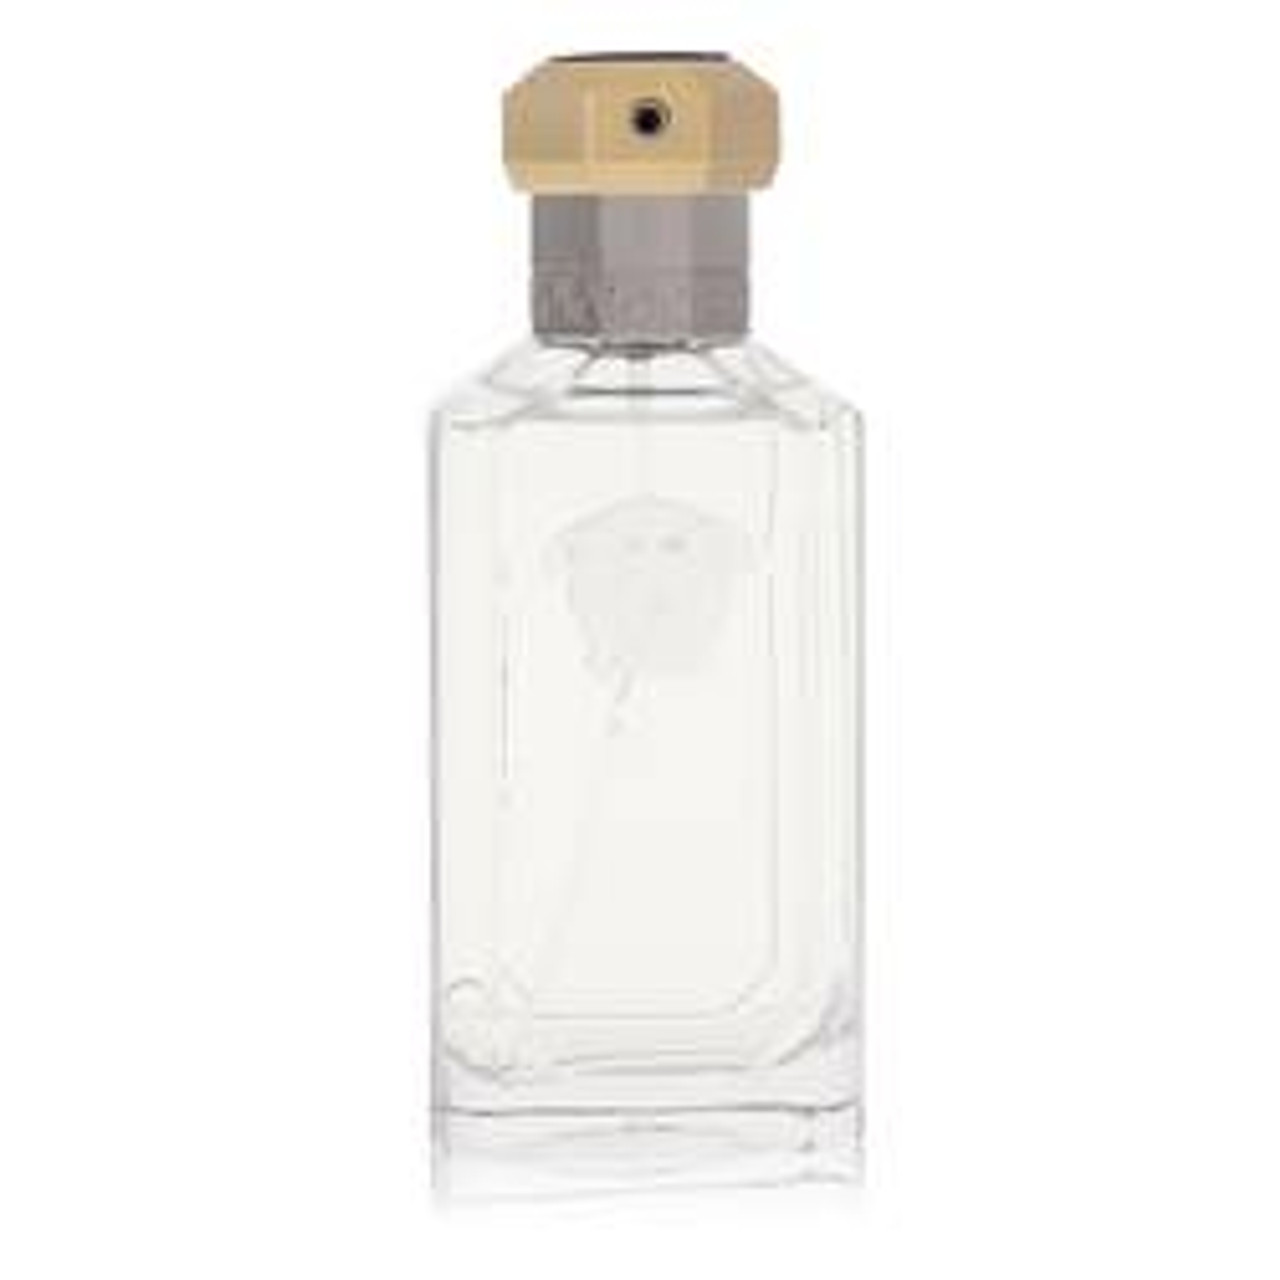 Dreamer Cologne By Versace Eau De Toilette Spray (Tester) 3.4 oz for Men - [From 71.00 - Choose pk Qty ] - *Ships from Miami